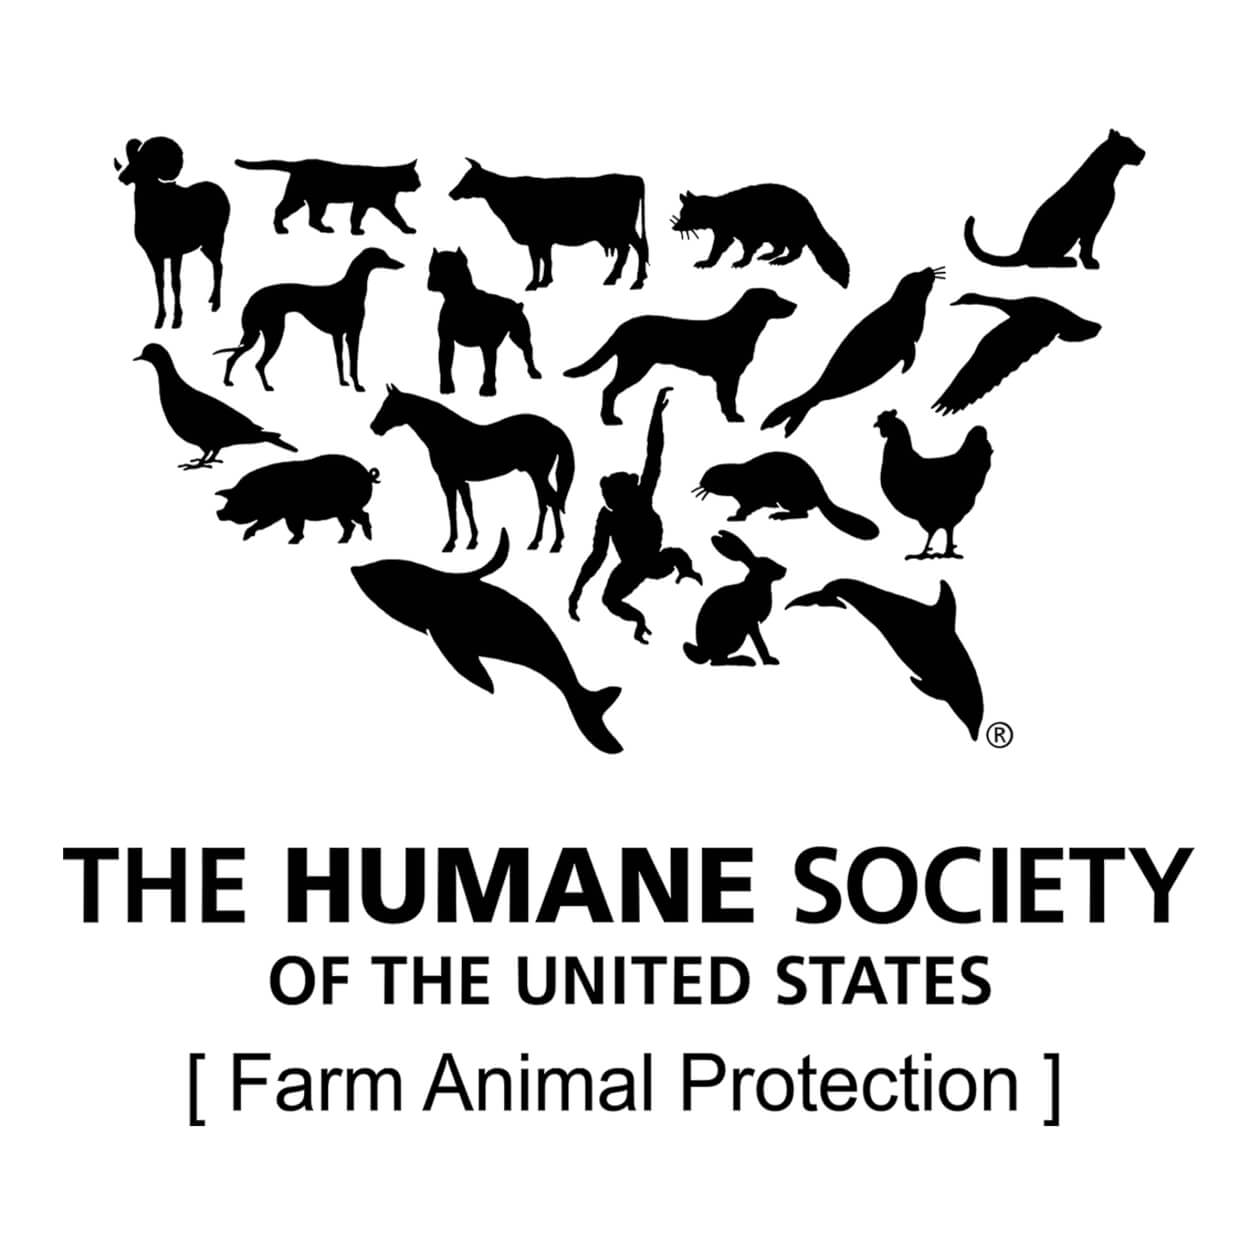 HSUS Farm Animal Protection Campaign Review - Animal Charity Evaluators